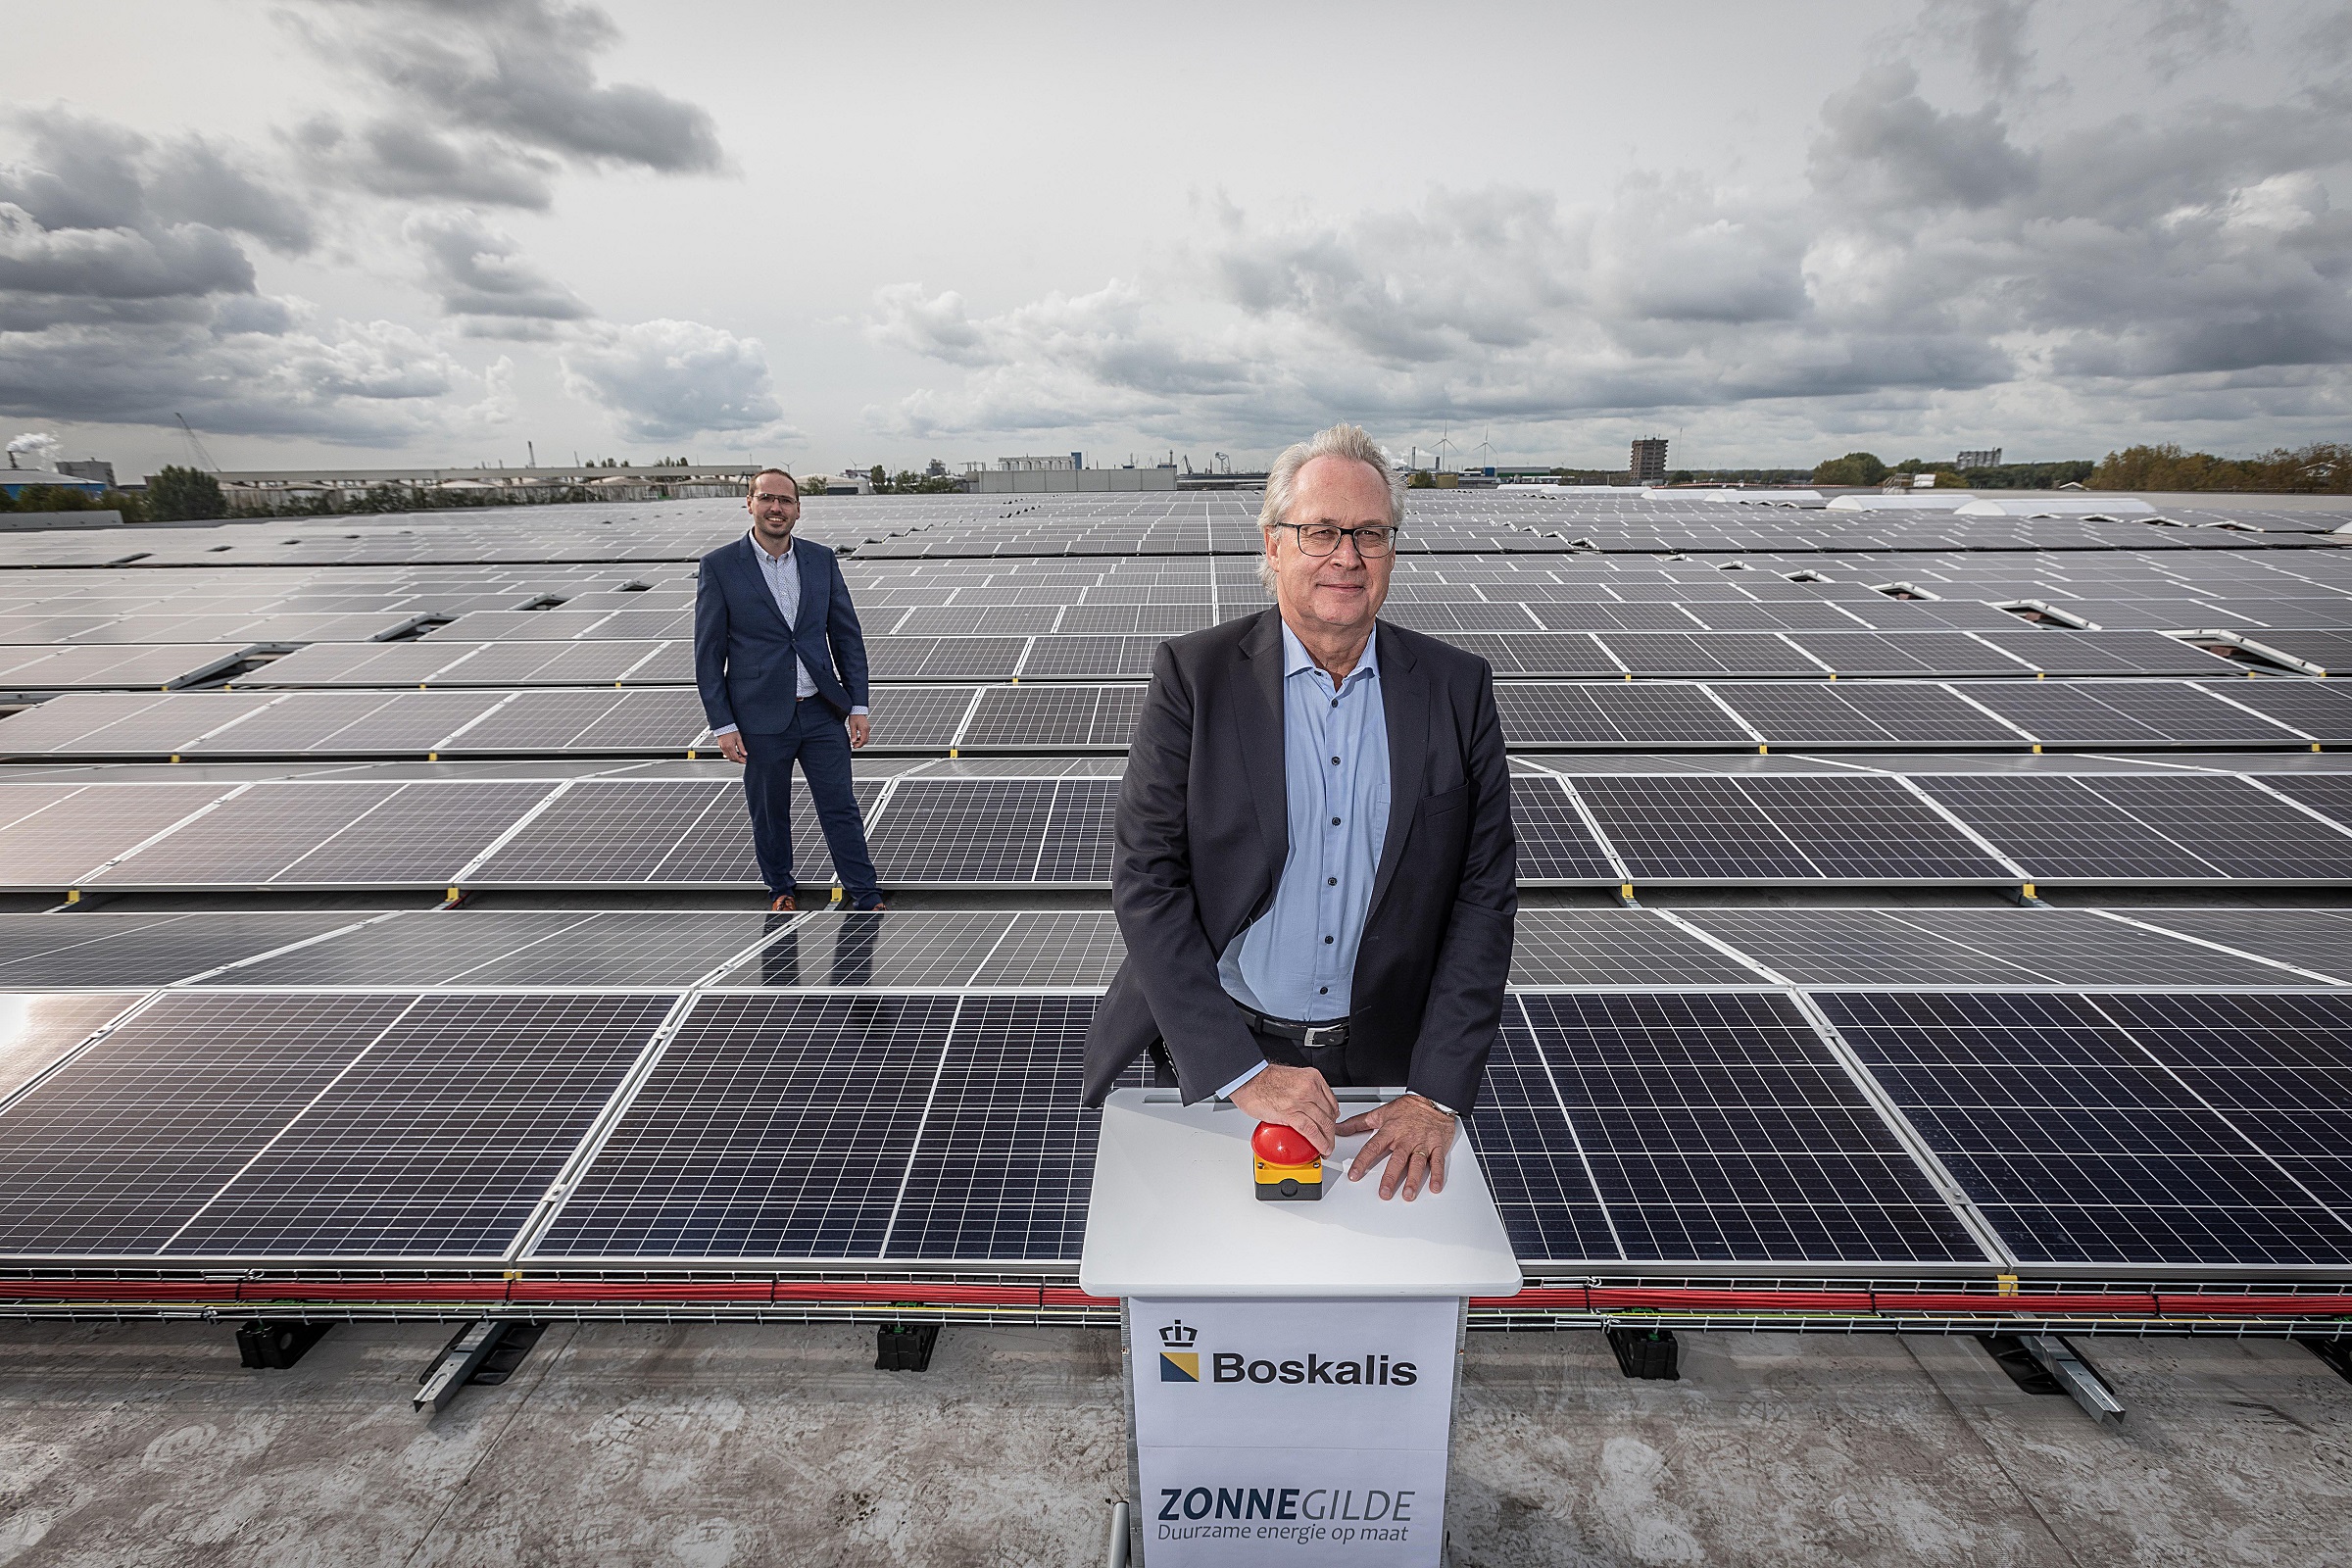 Boskalis takes 5,350 solar panels into use, representing 15% of own energy consumption in the Netherlands